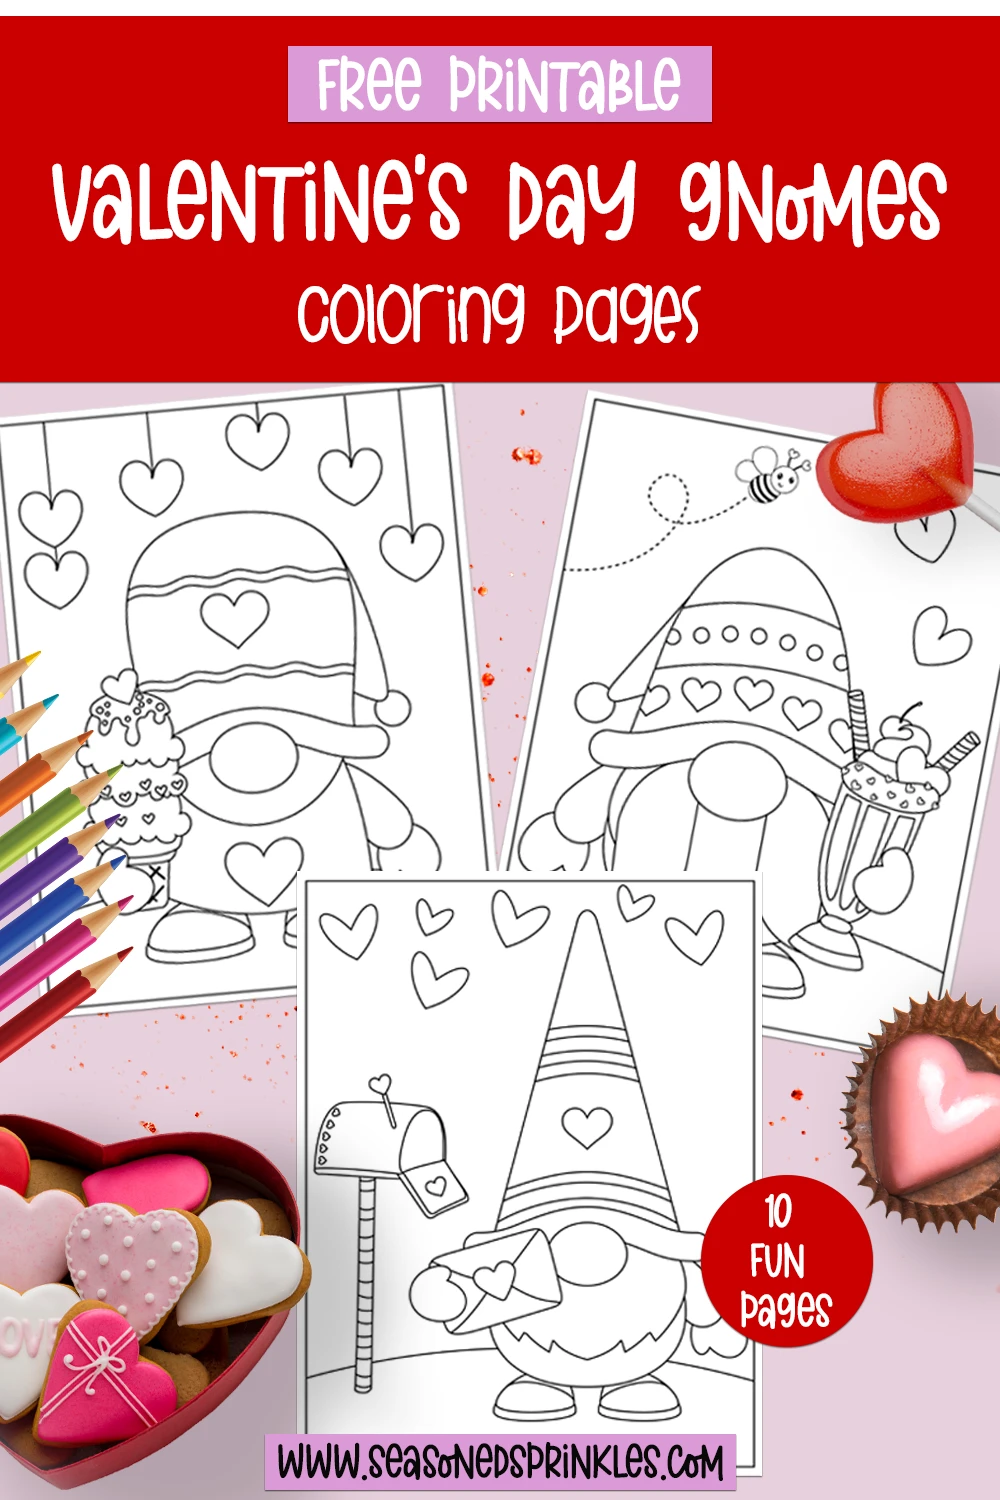 Free Valentine's Day Coloring Page Valentine's Day Gnomes 